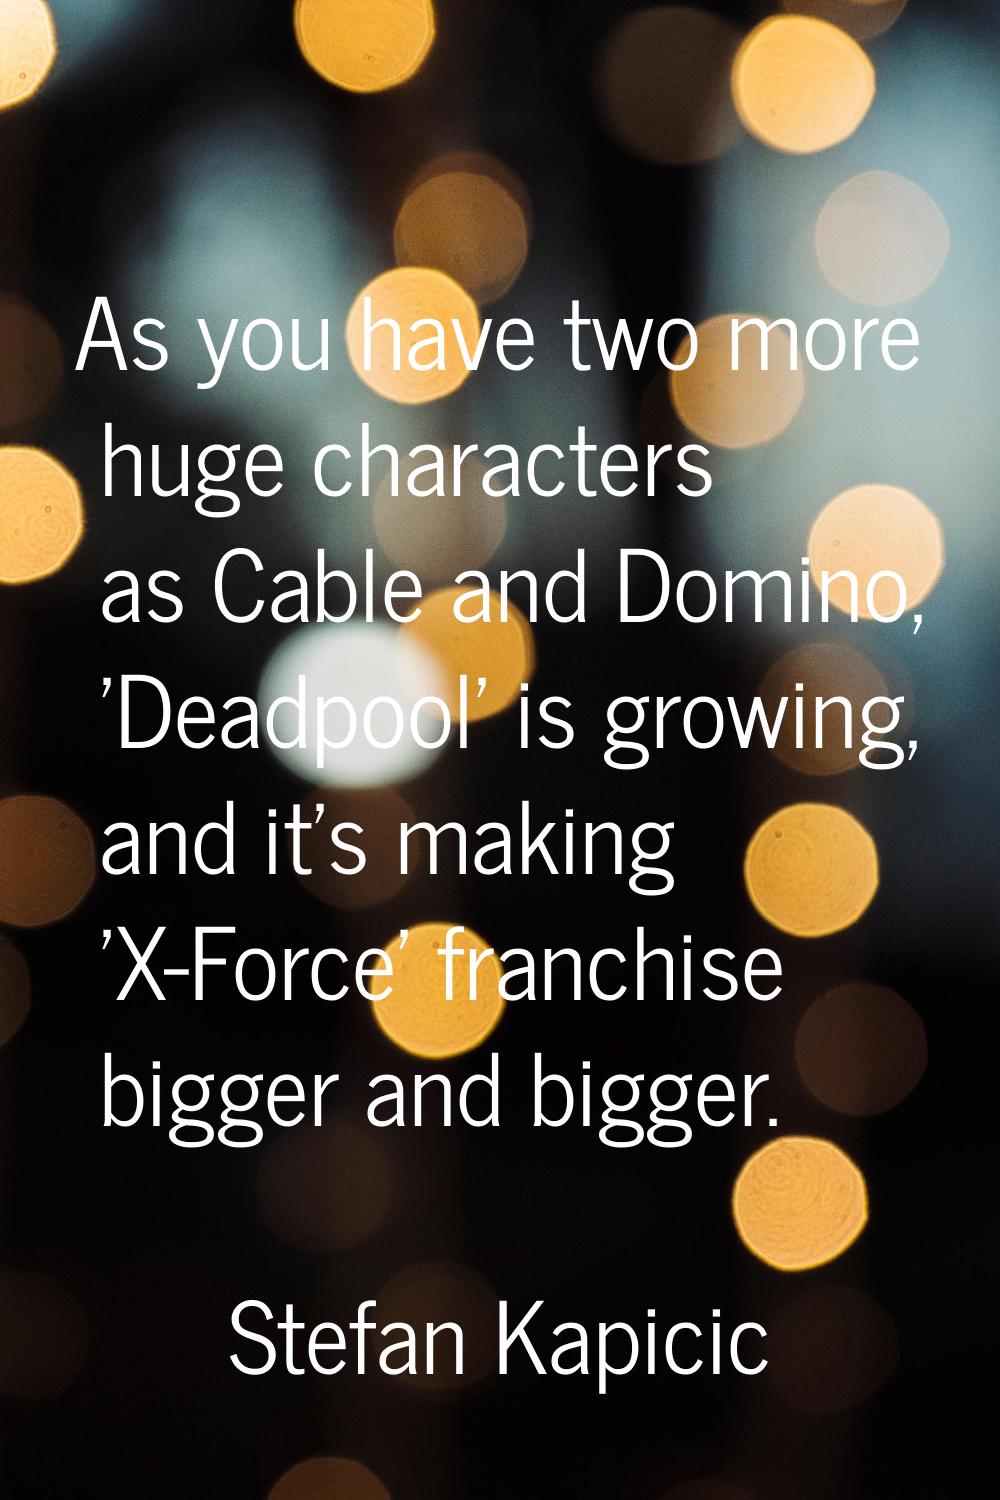 As you have two more huge characters as Cable and Domino, 'Deadpool' is growing, and it's making 'X